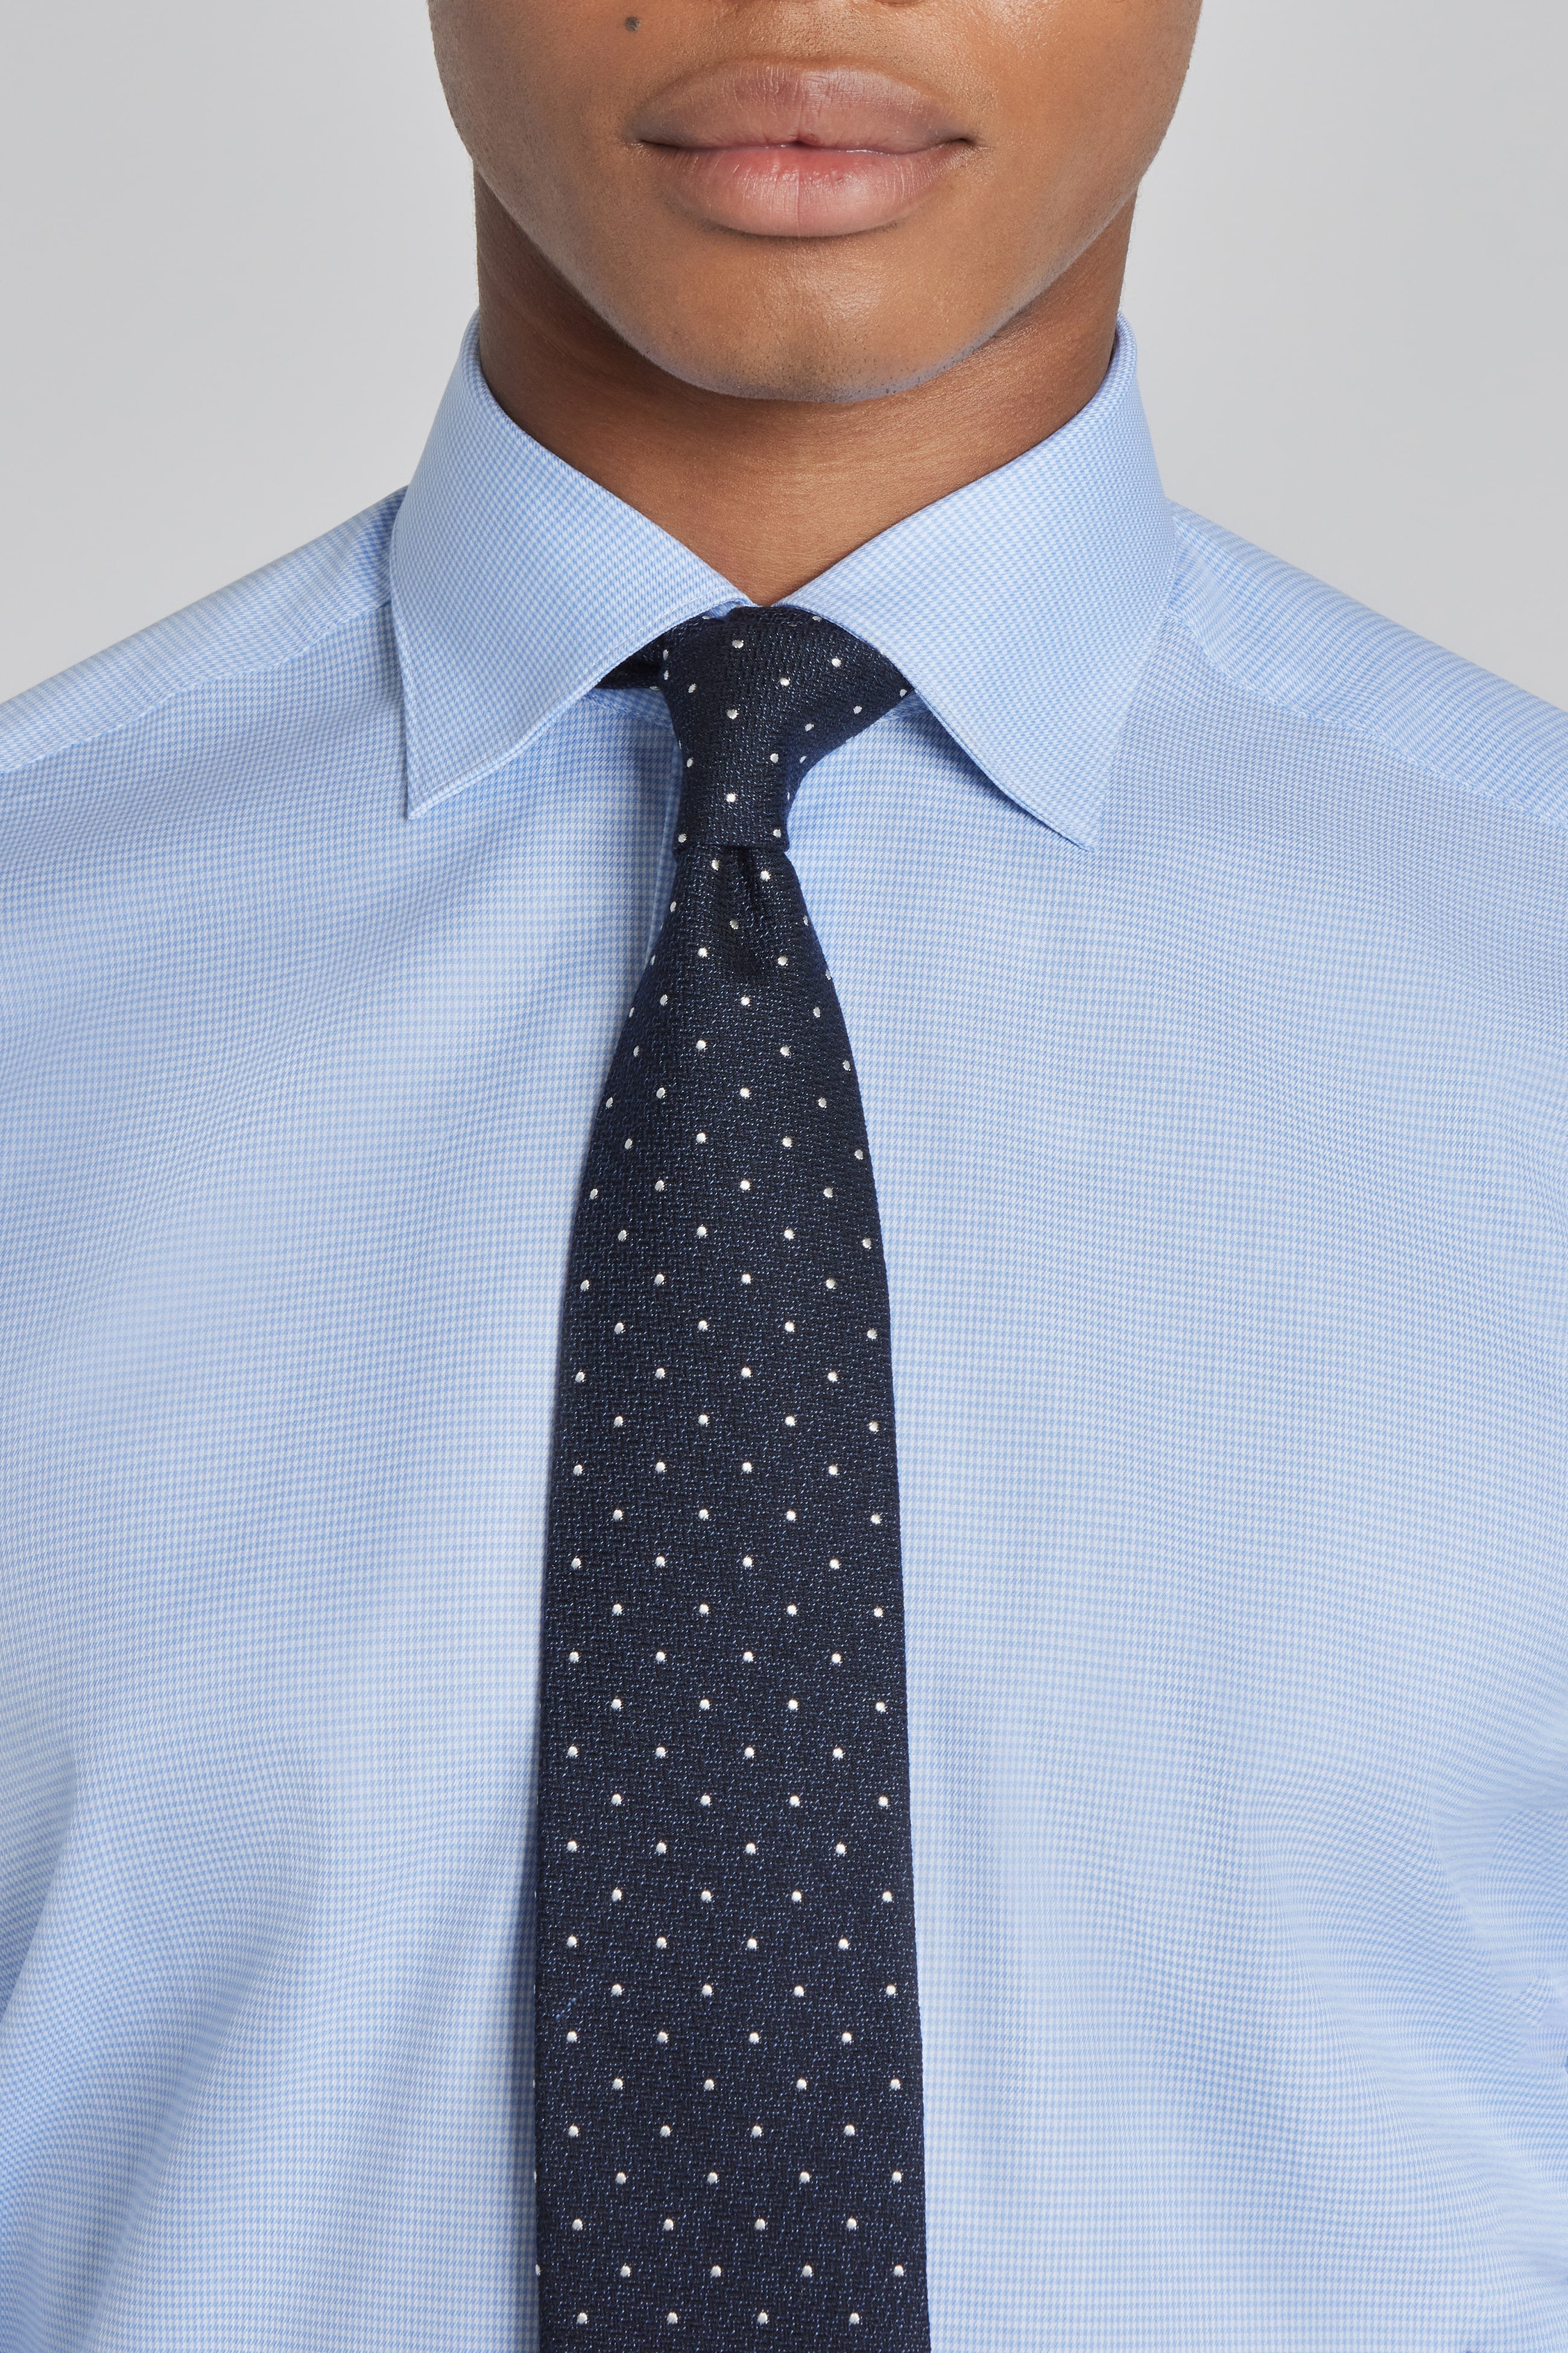 Alt view 3 Micro Houndstooth Cotton Dress Shirt in Blue